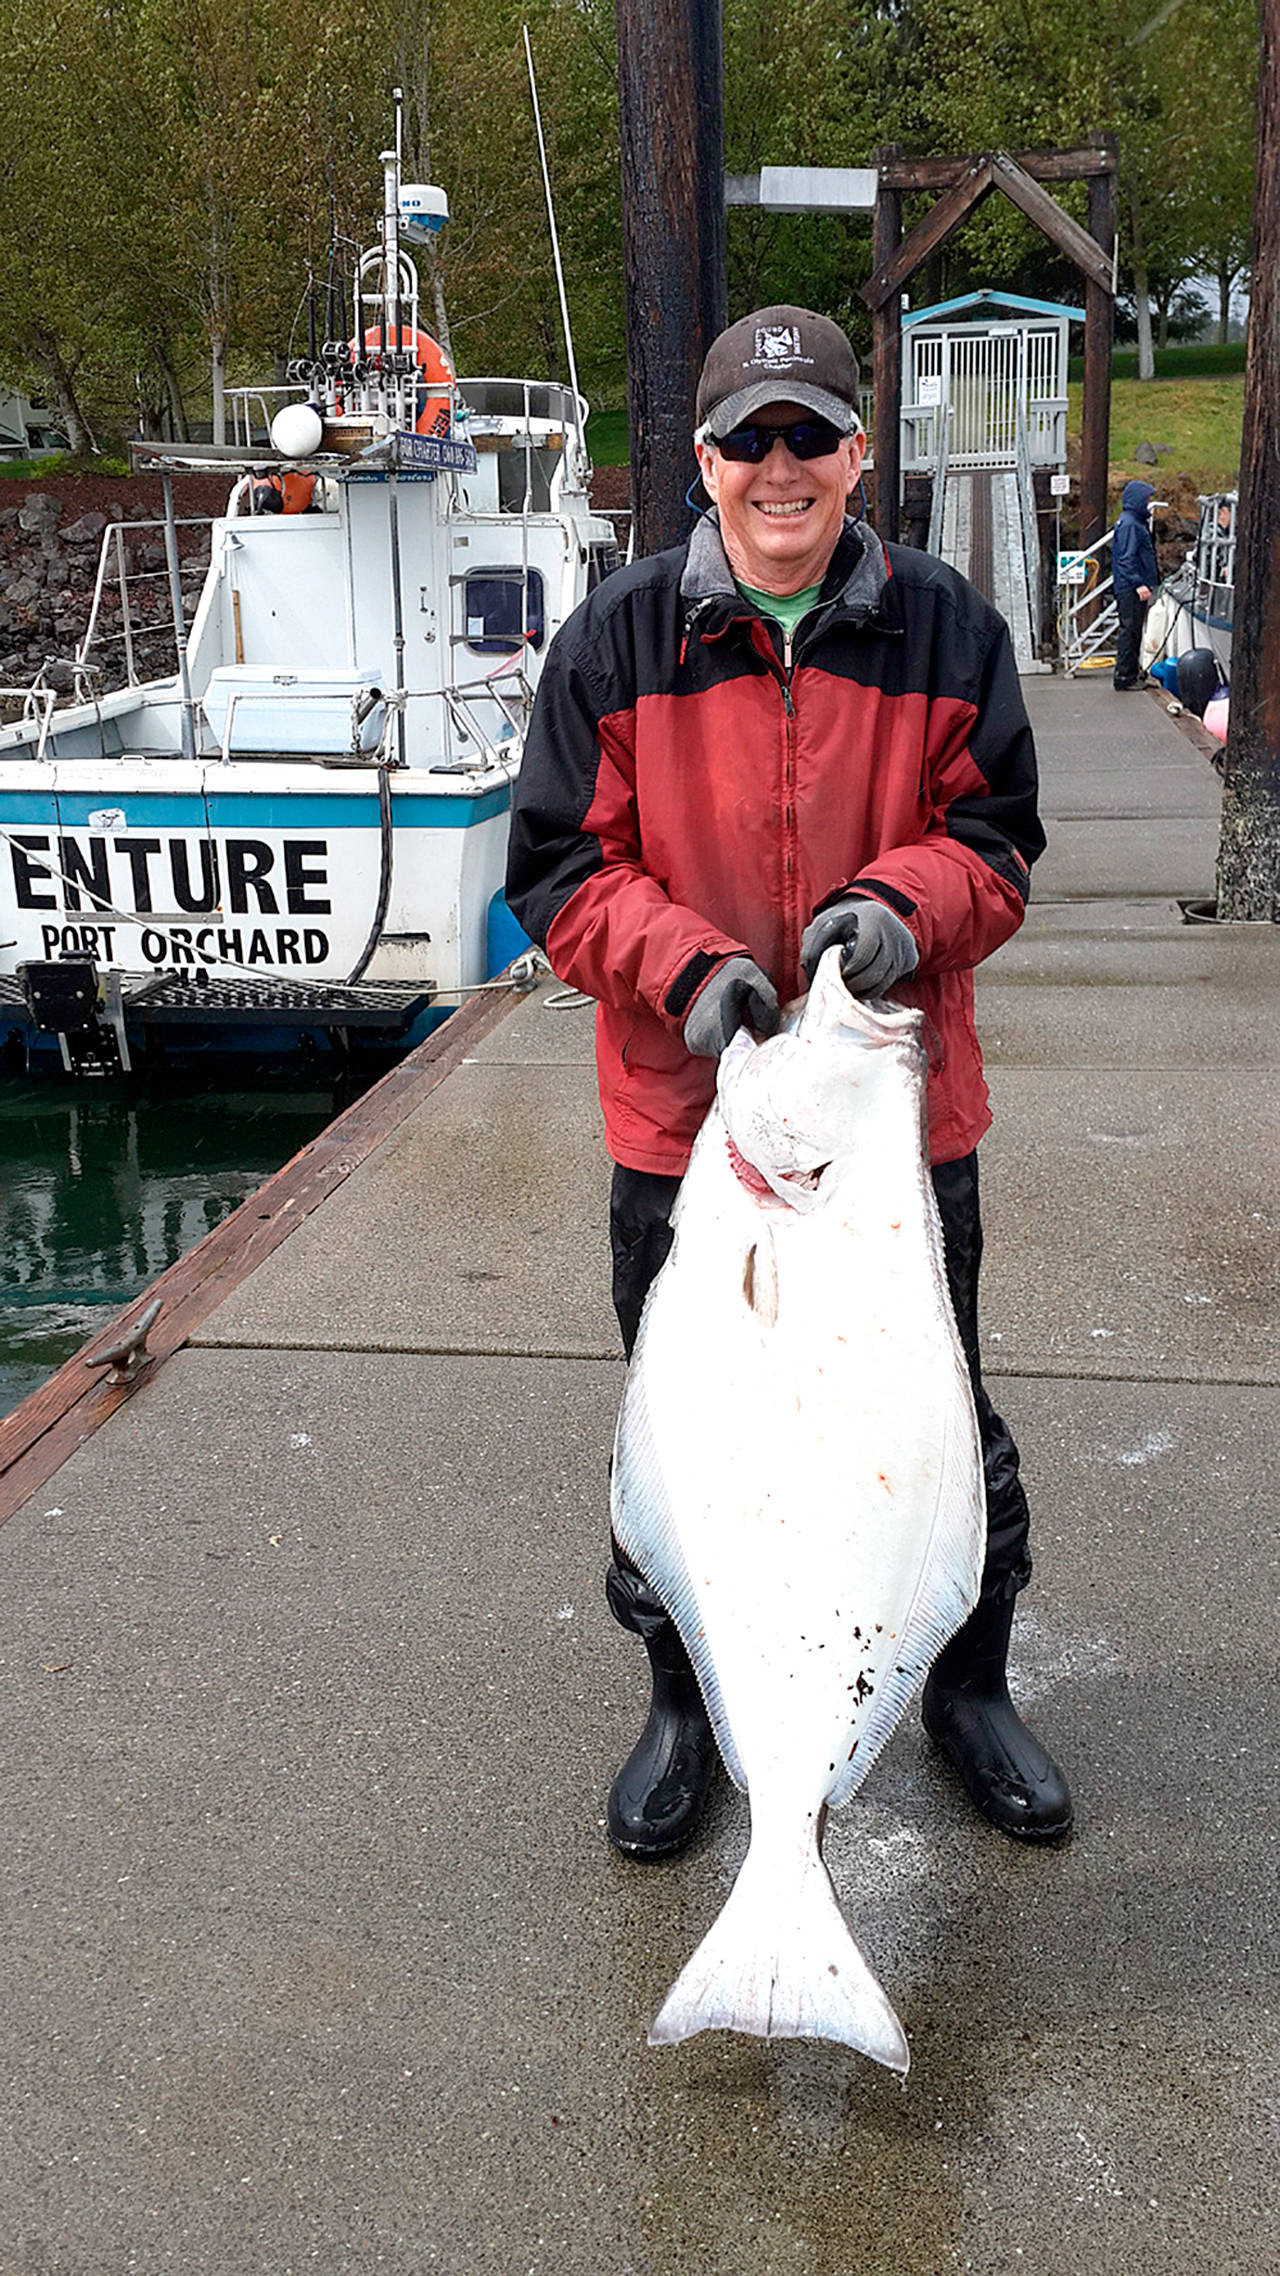 Puget Sound Anglers president Bob Keck caught this halibut. The 2020 season is likely to open in mid-April in marine areas 6-10.